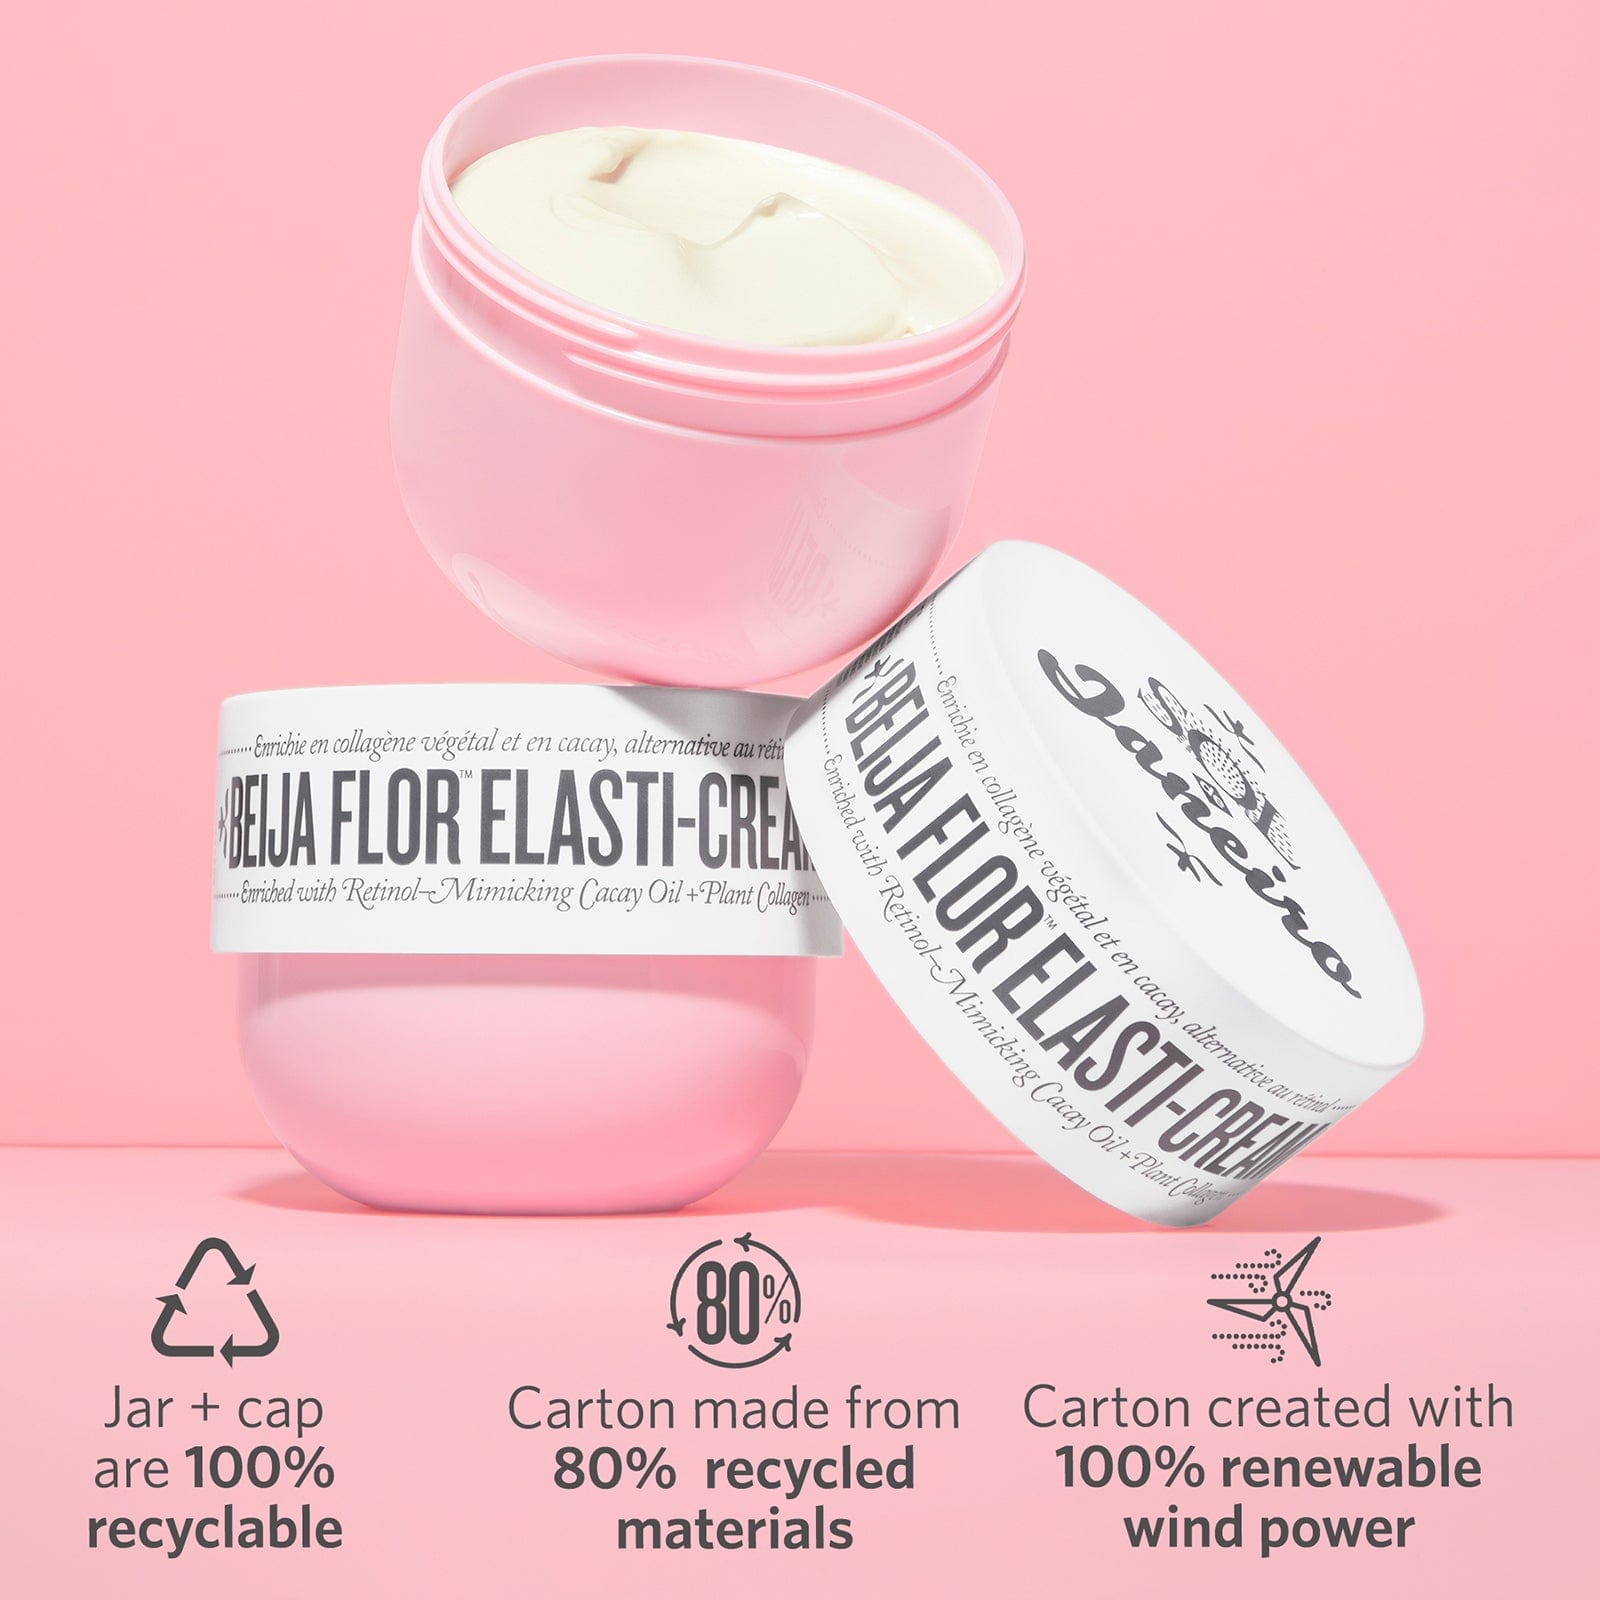 jar and cap are 100% recyclable | carton made from 80% recycled materials | Carton created with 100% renewable wind power | Beija flor elasti-cream | Sol de Janeiro